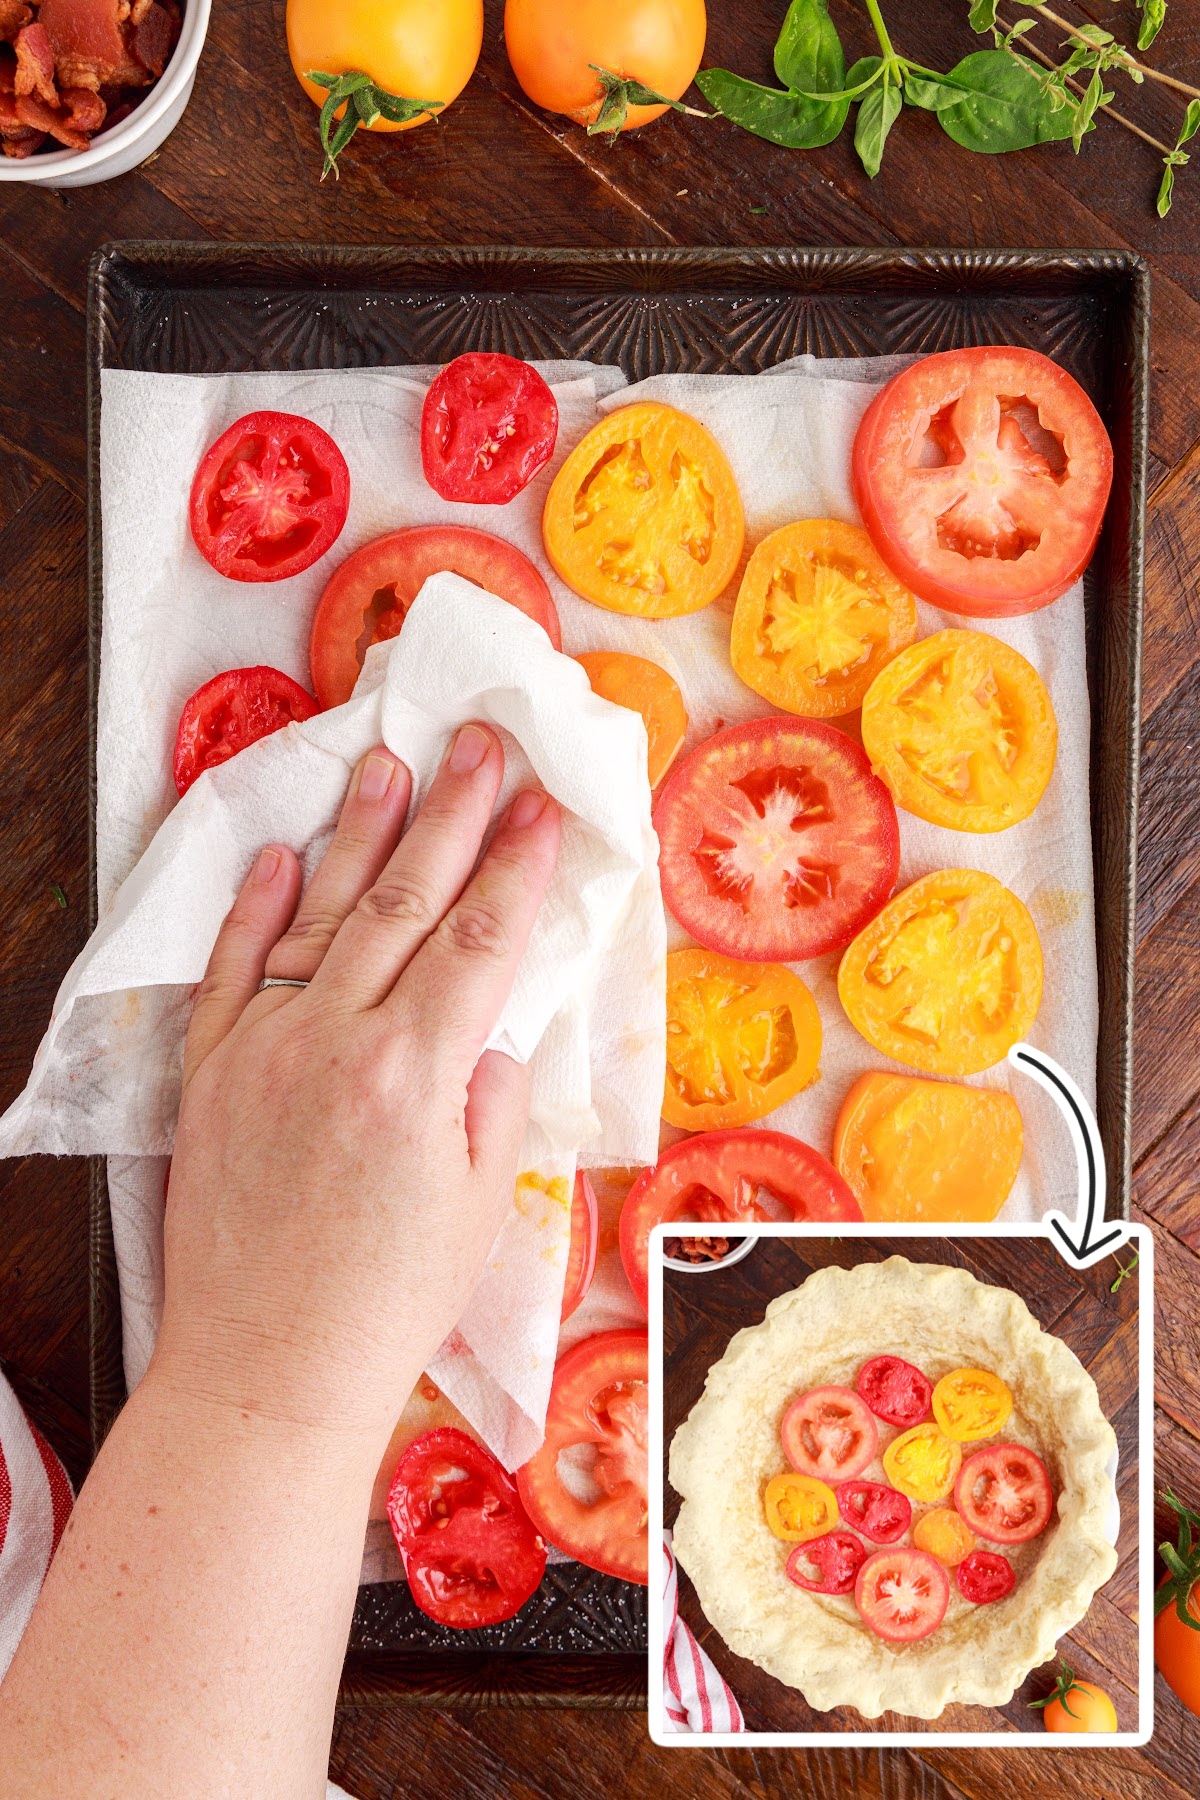 Patting the tomatoes dry with paper towels and placing tomatoes in pie crust.